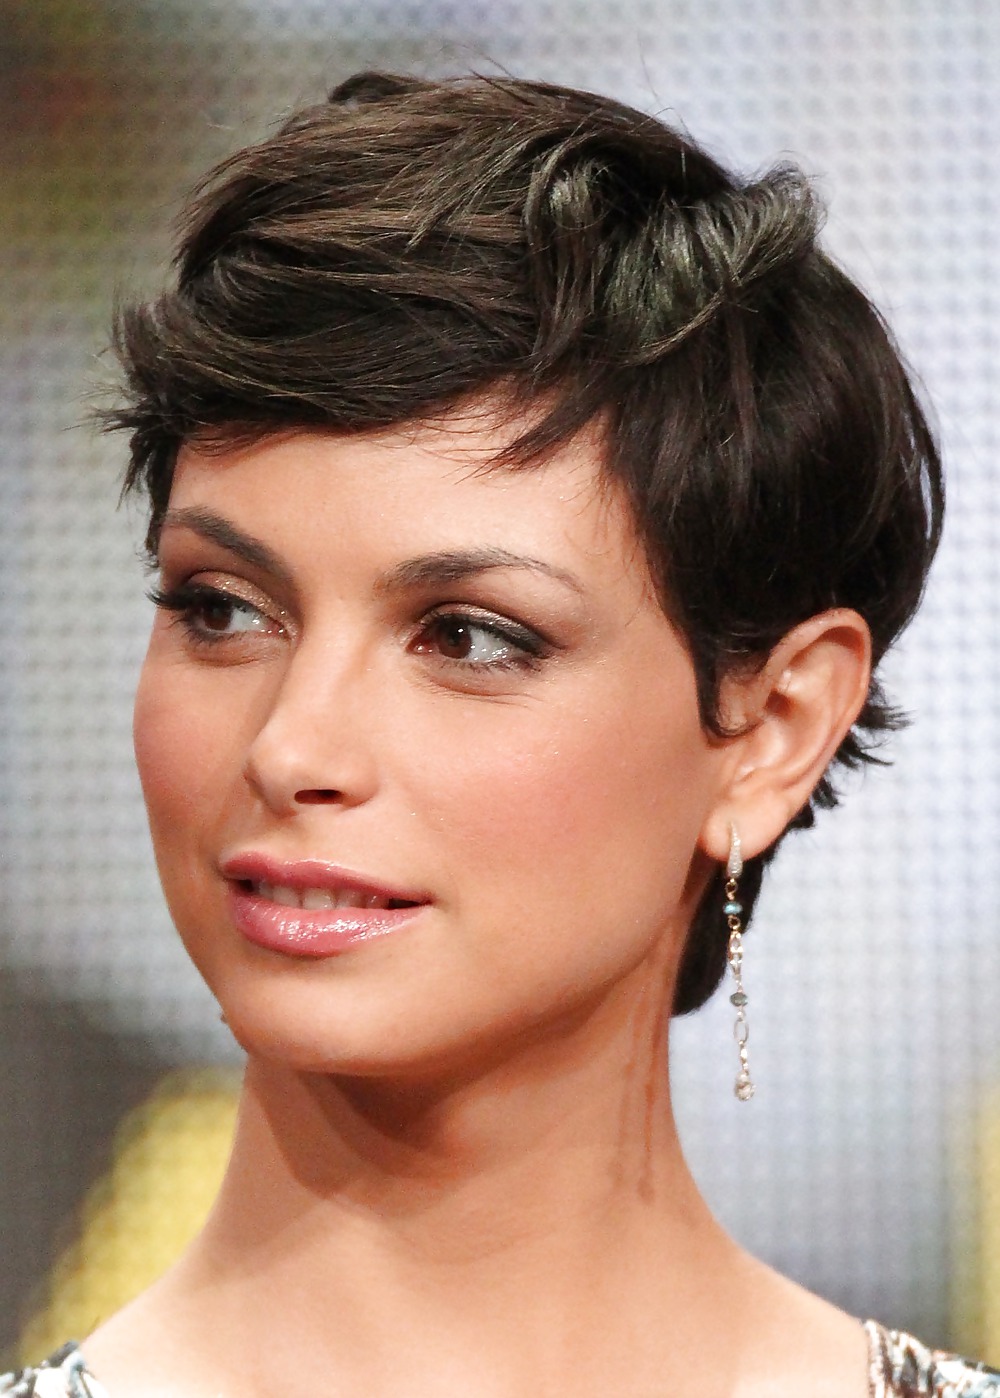 Short hair celebs and sporties #35907504